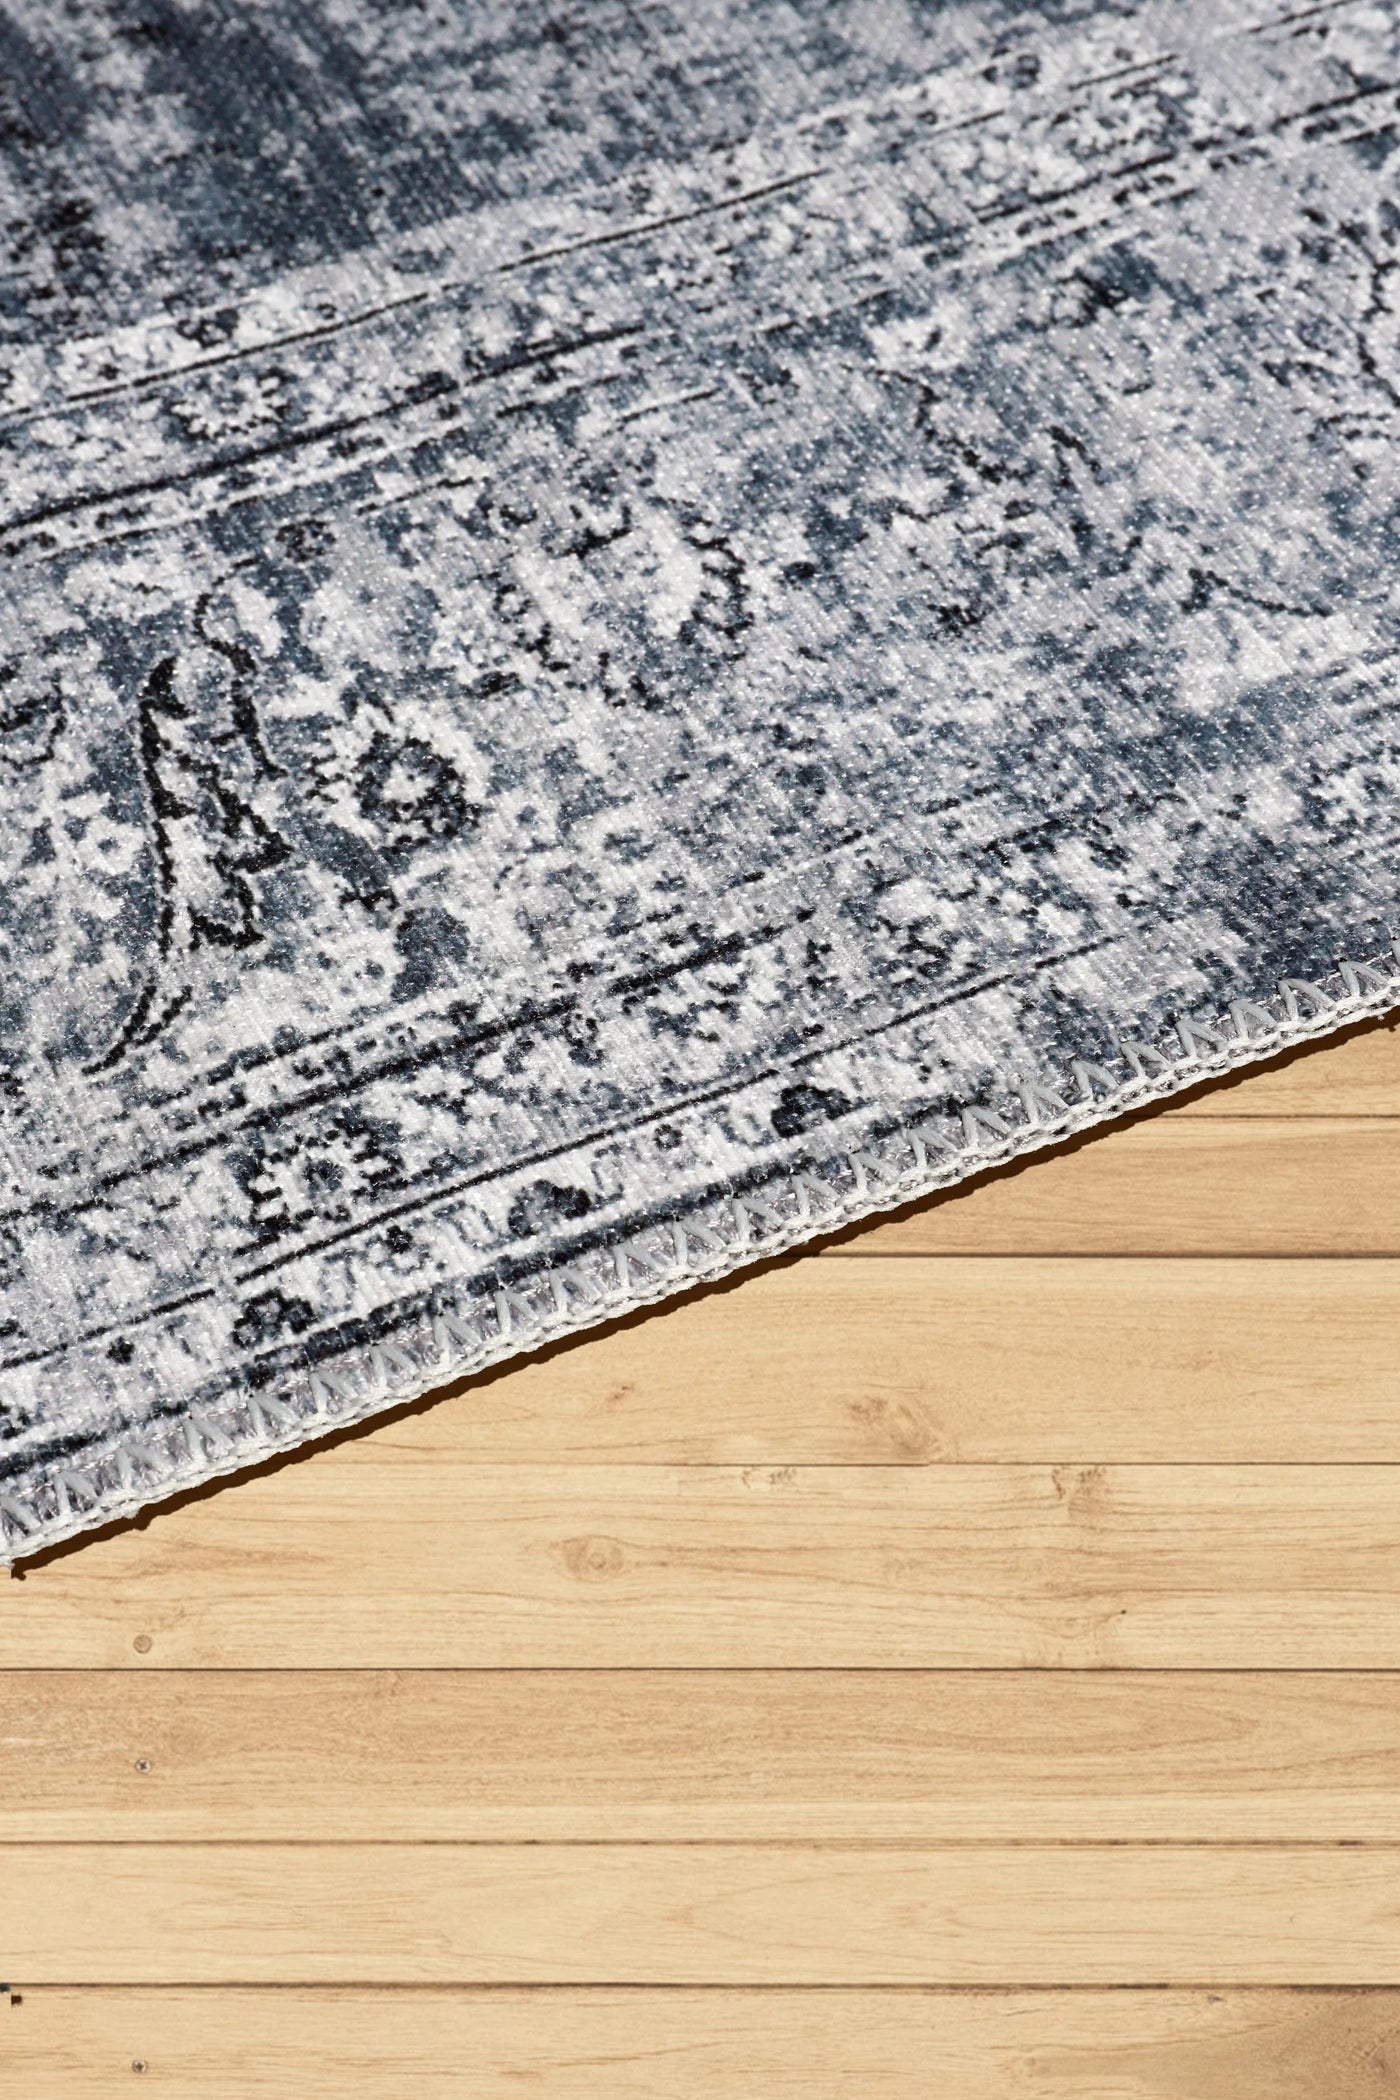 New Jersey Distressed Rug - 128 Grey